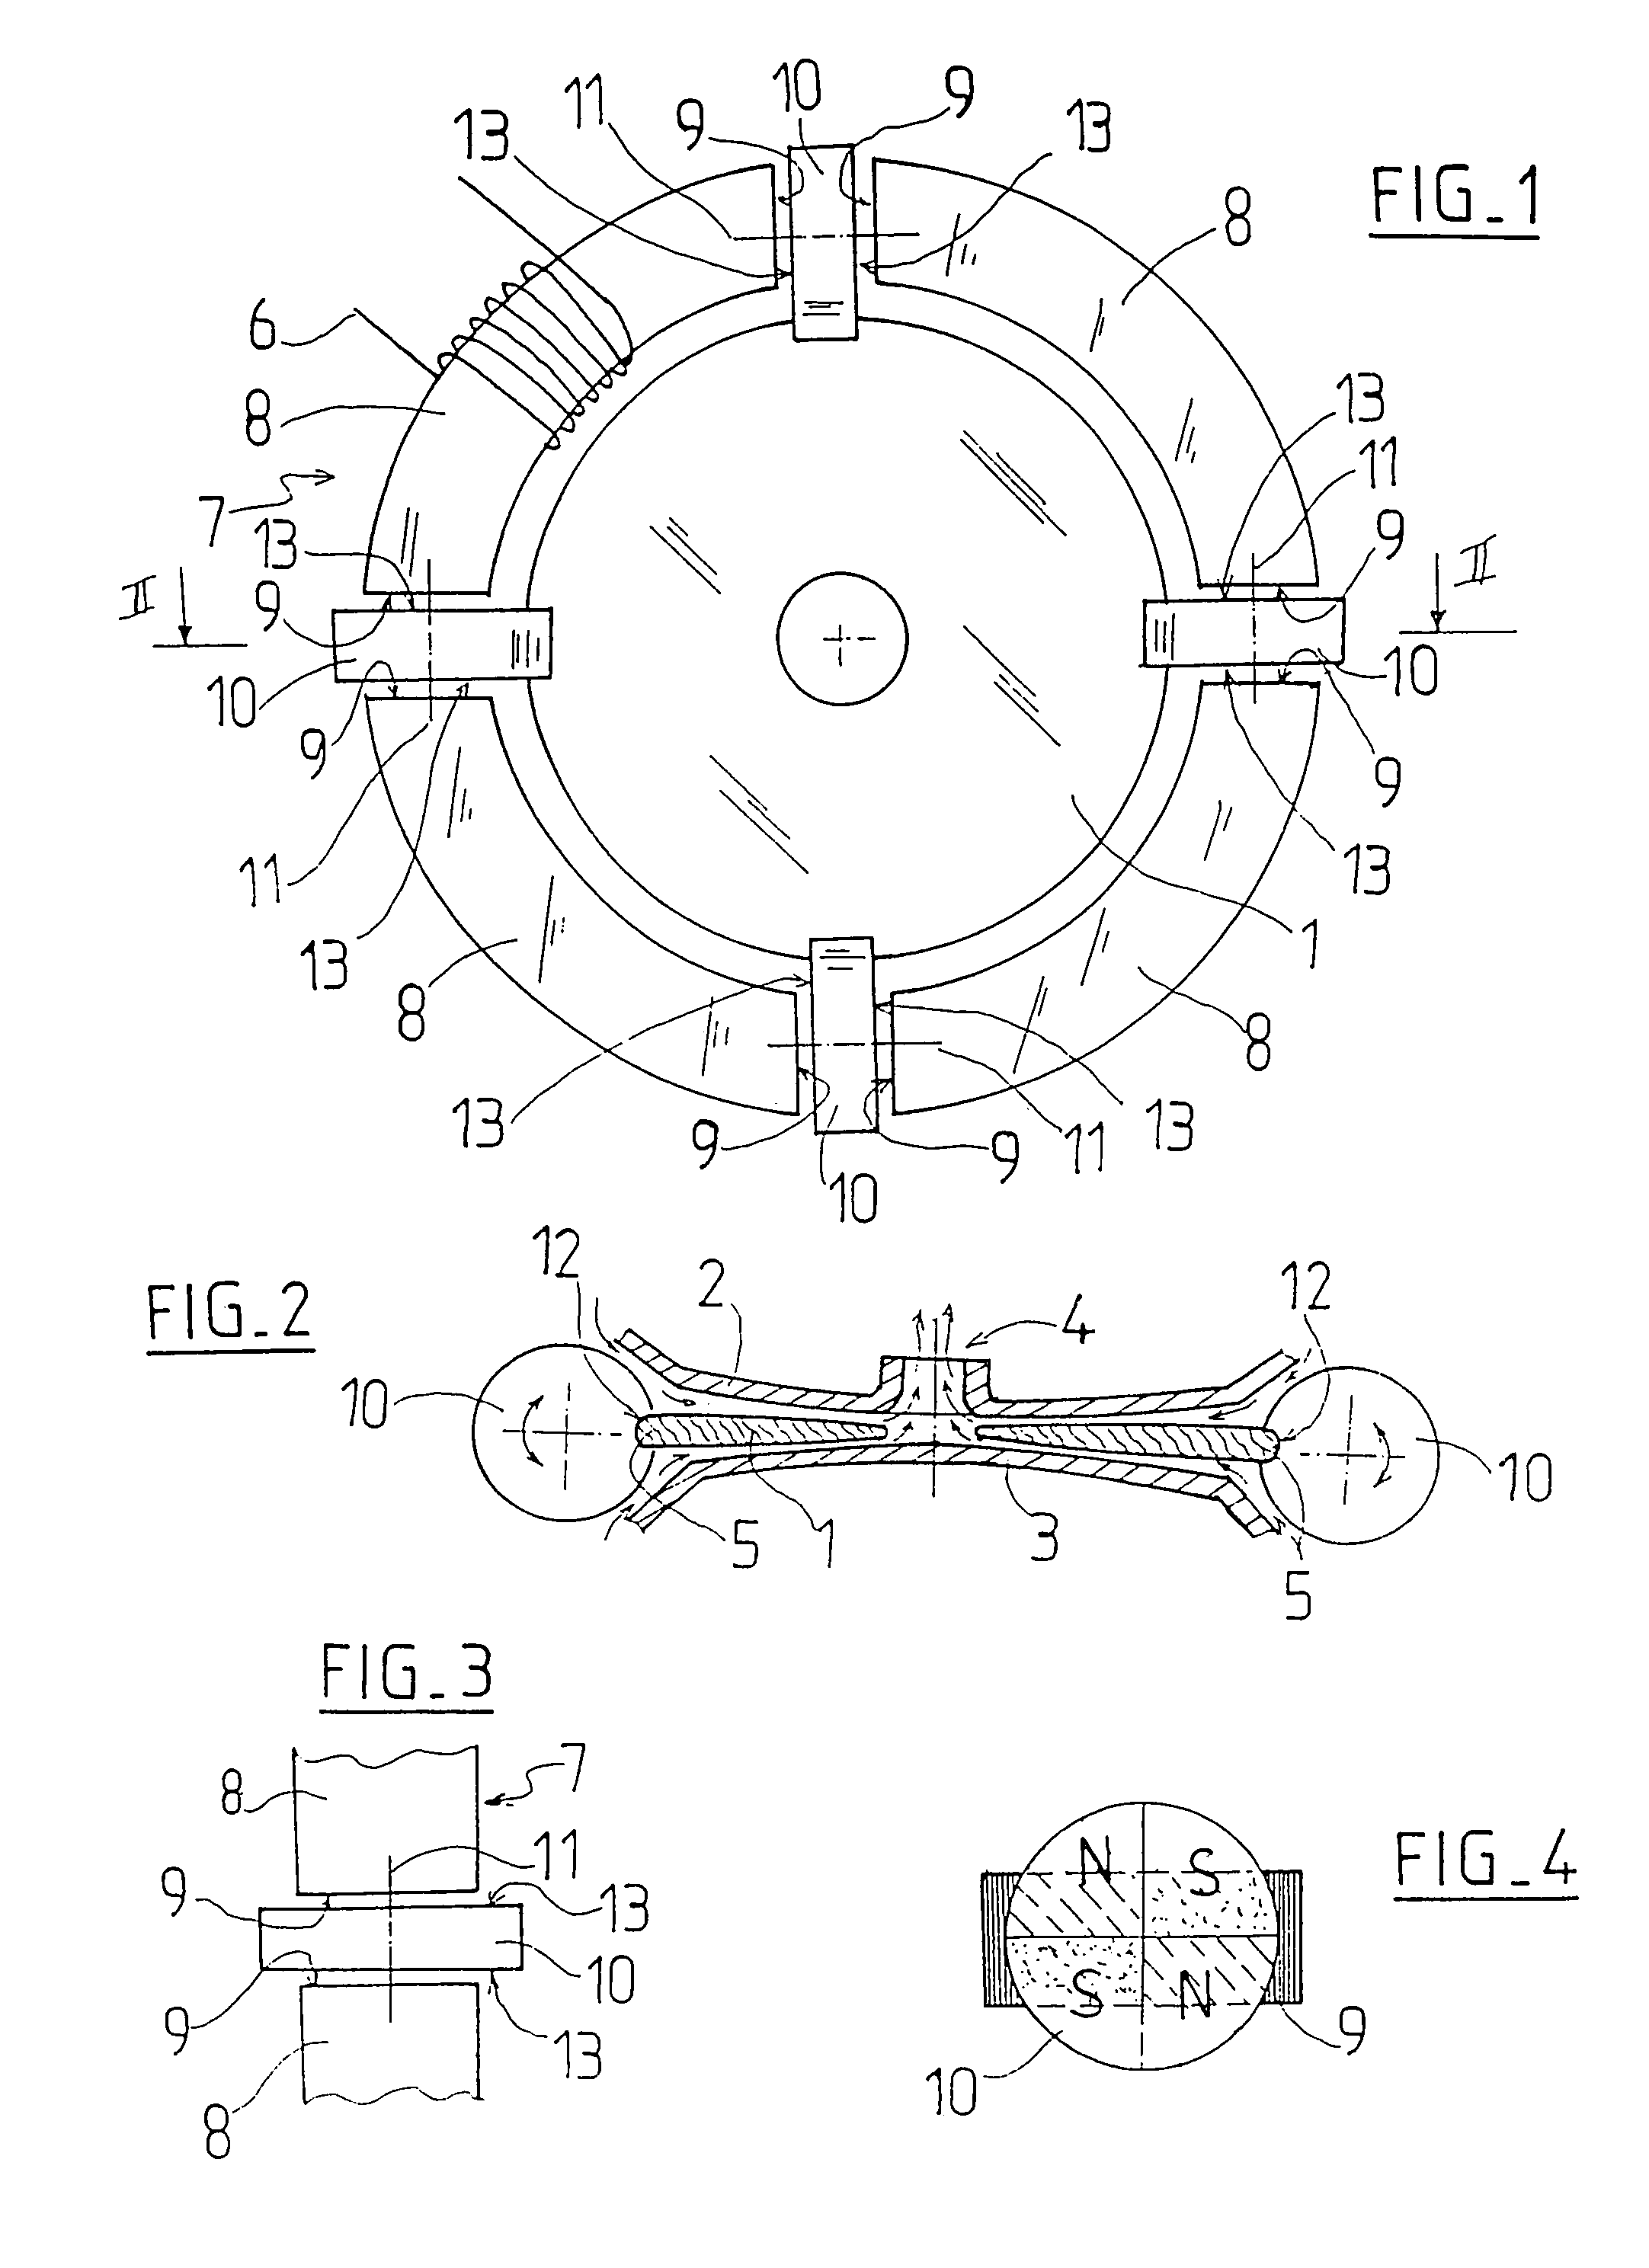 Electromagnetic machine with a deformable membrane